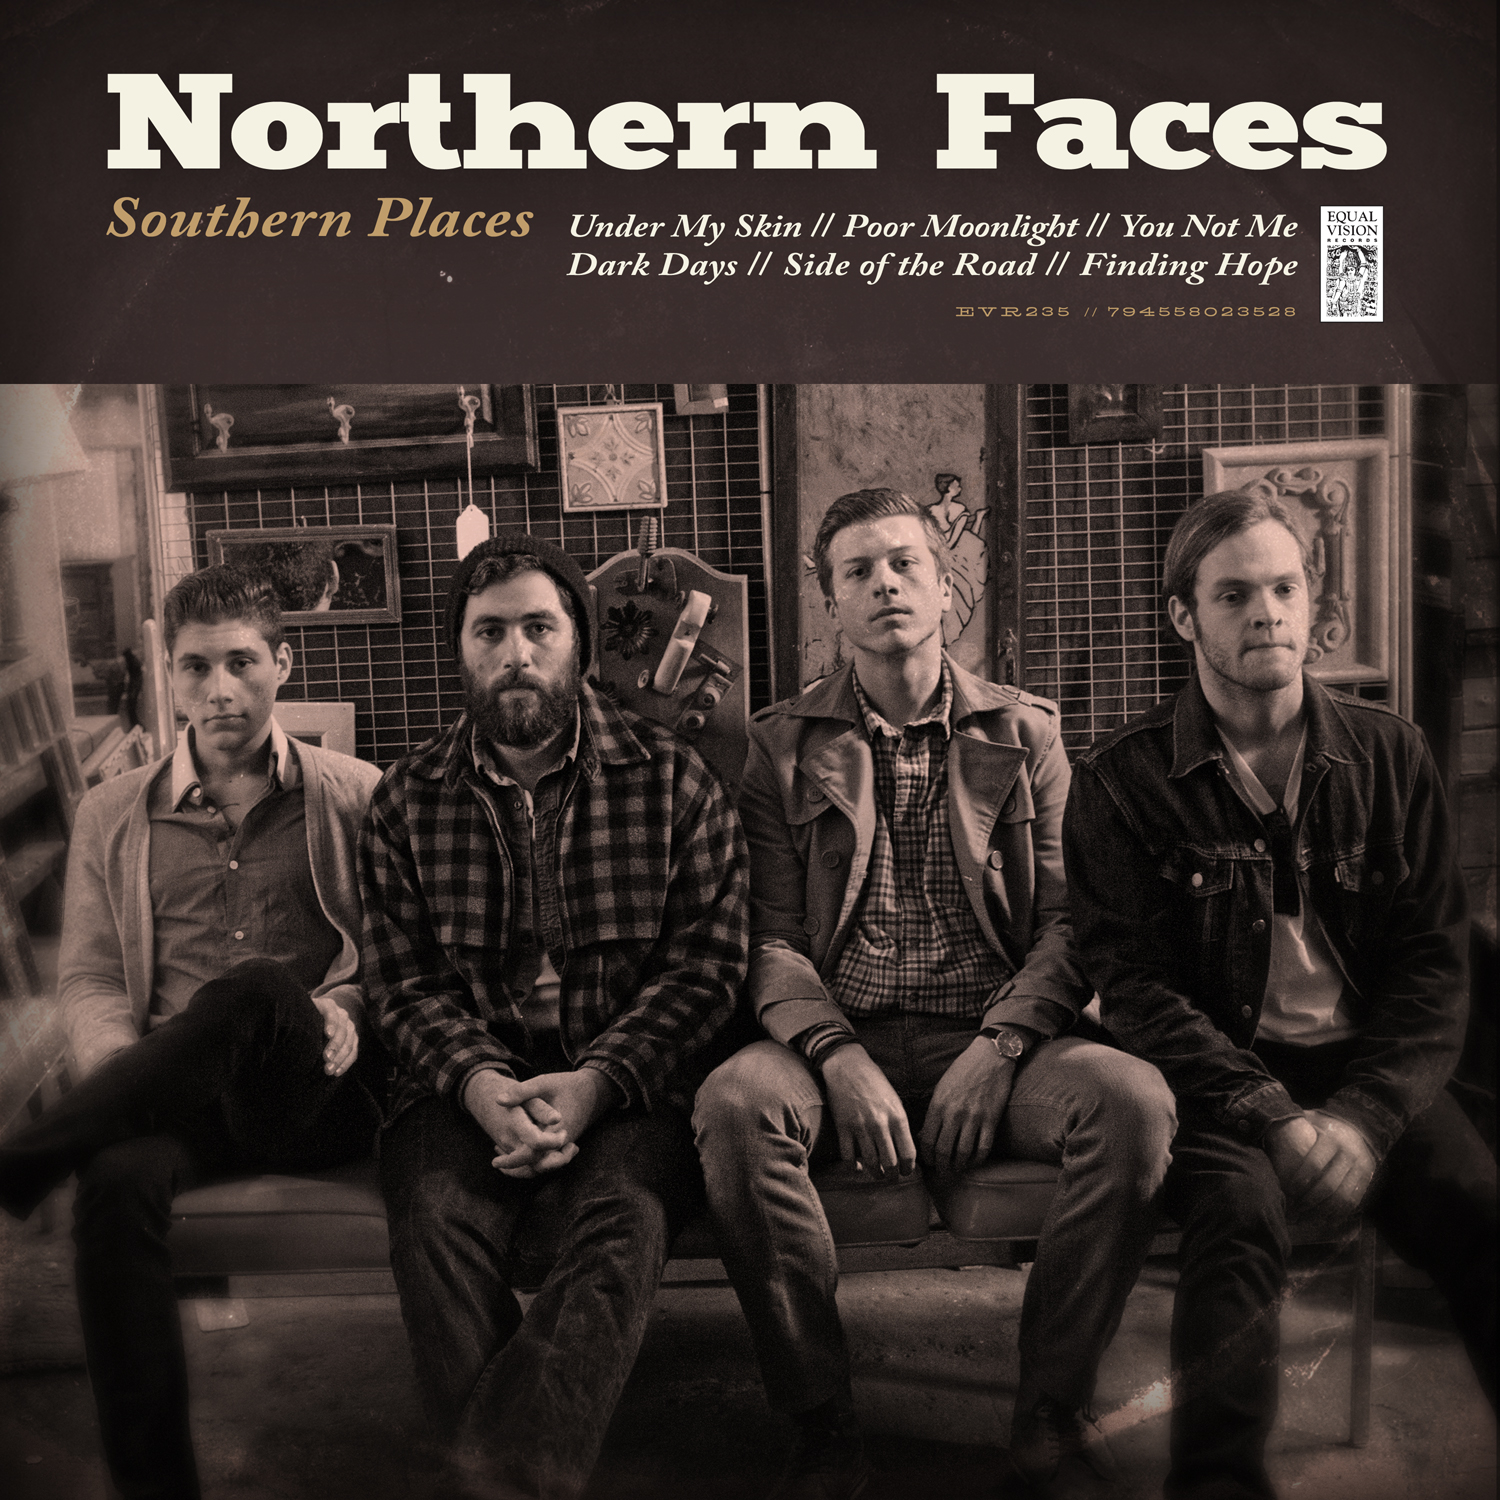 NorthernFaces_SouthernPlaces_evr235